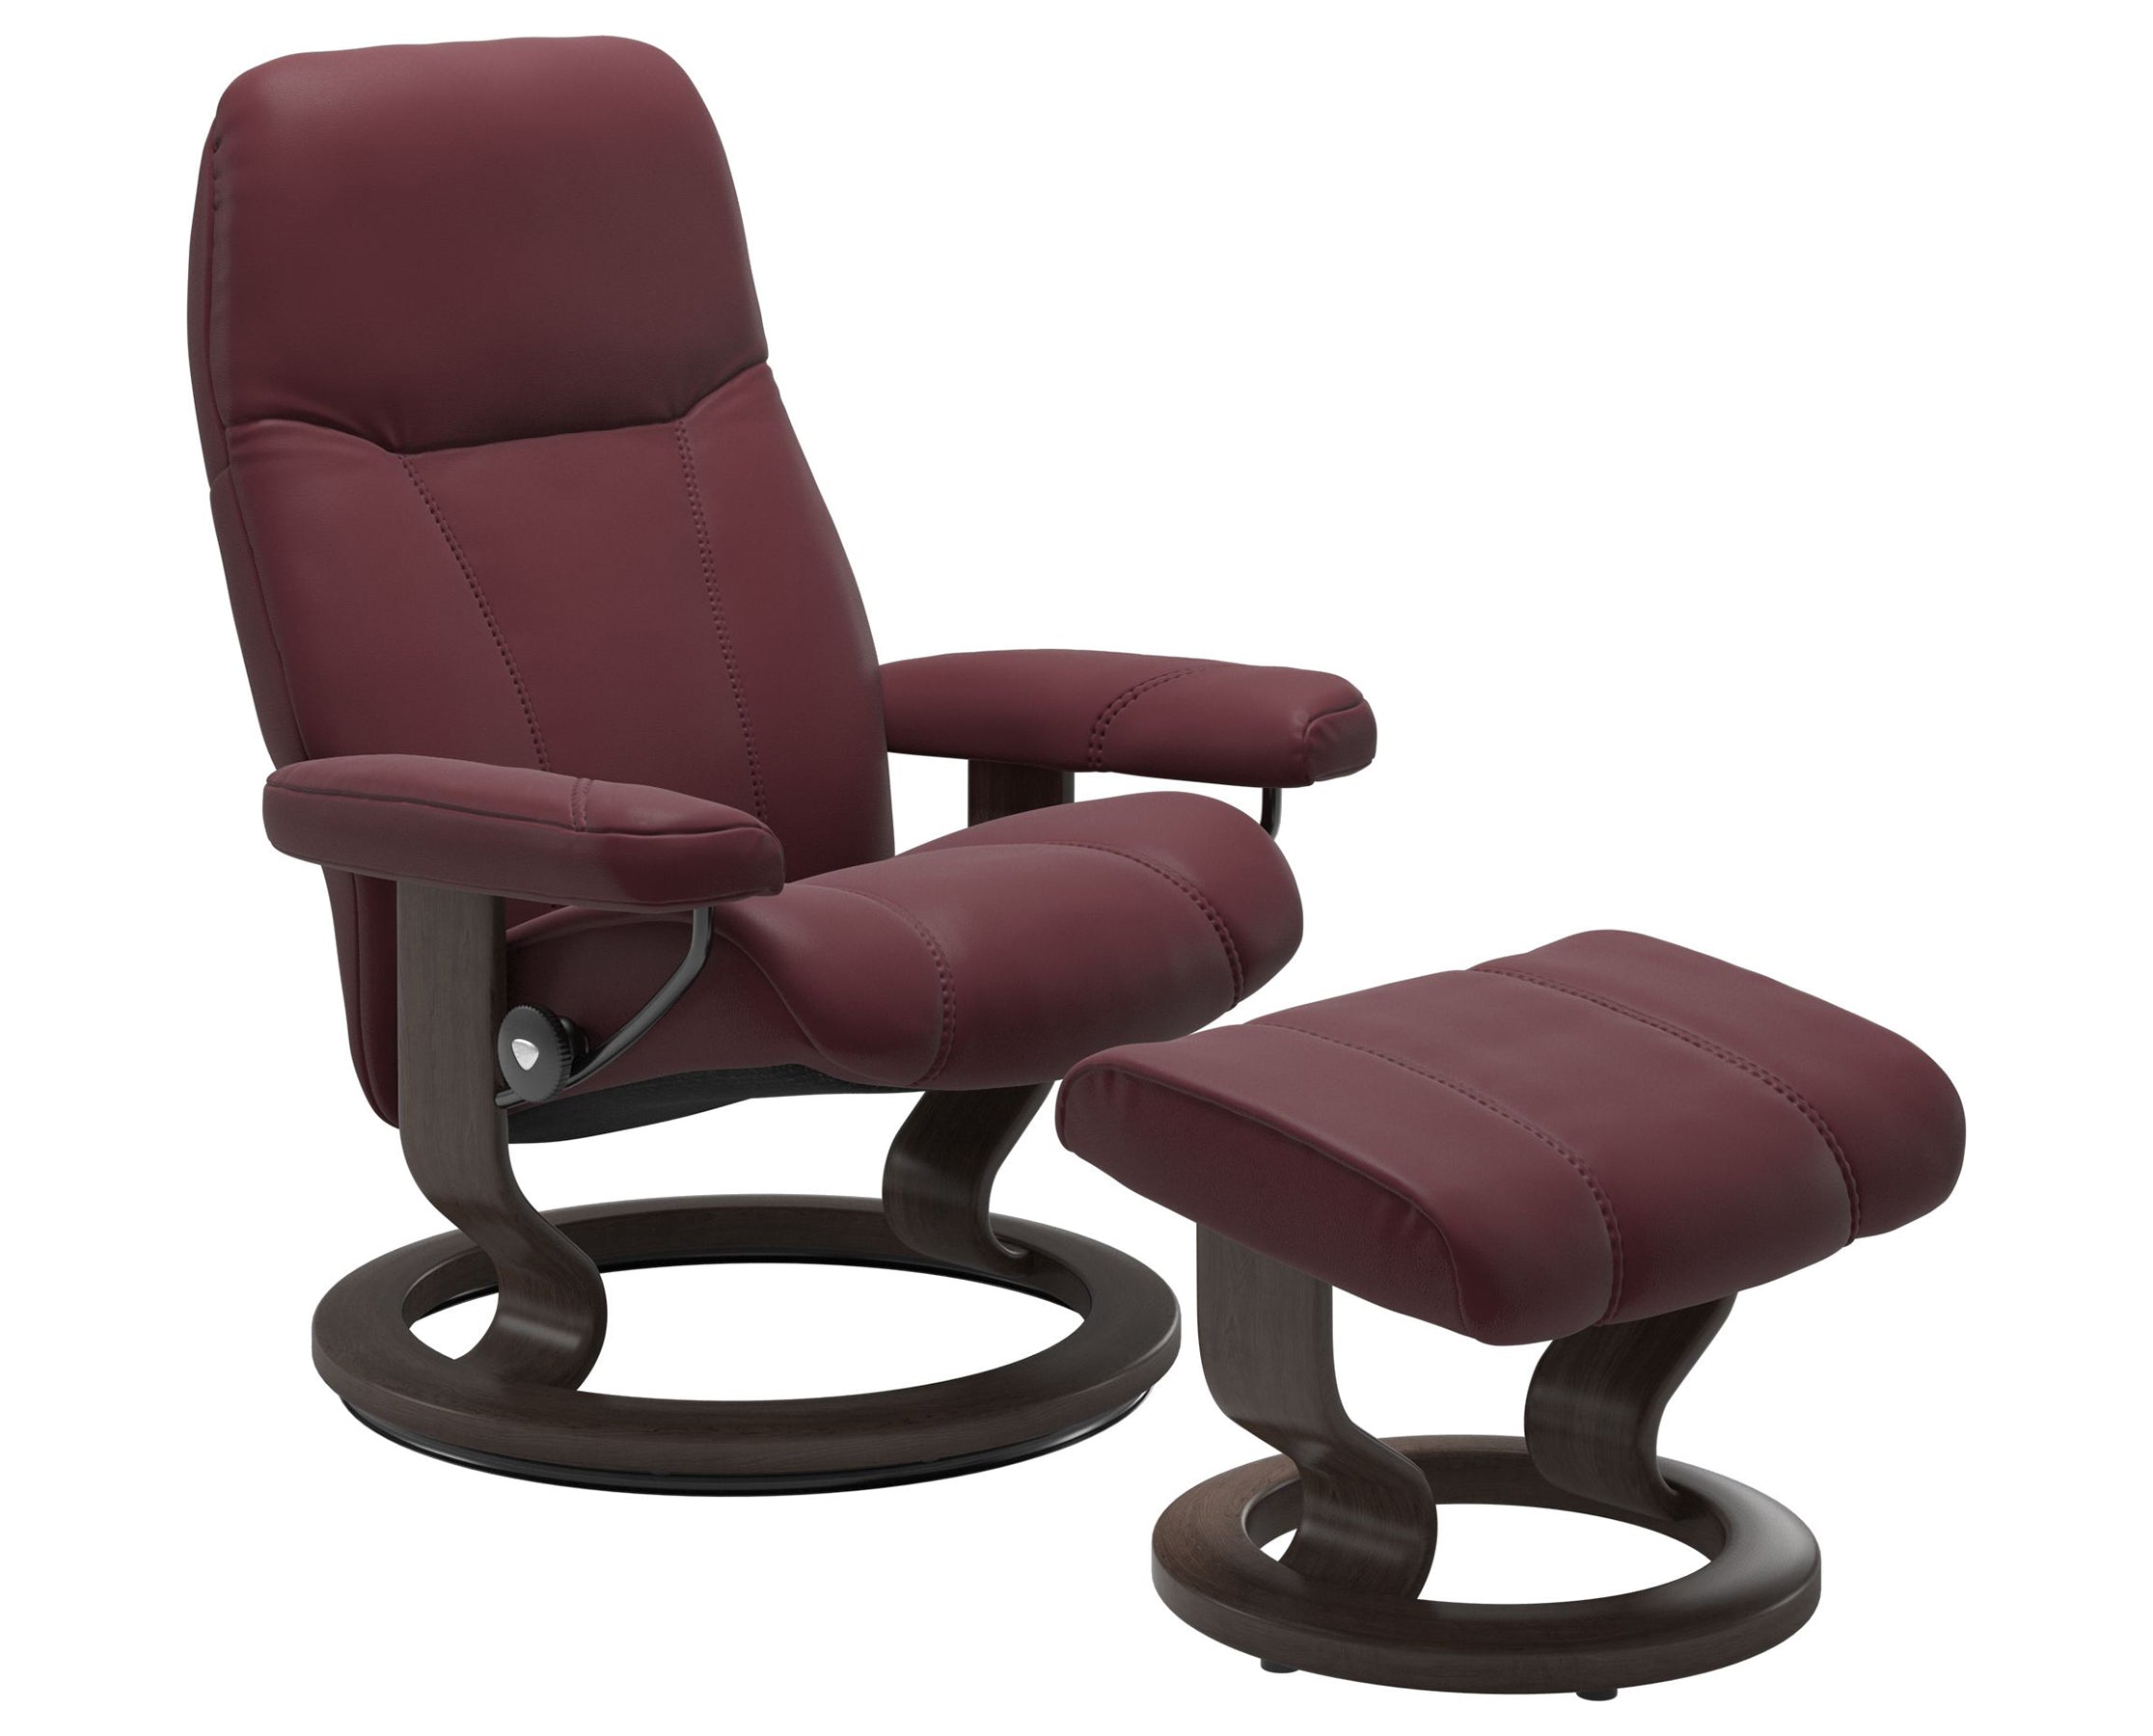 Batick Leather Bordeaux S/M/L and Wenge Base | Stressless Consul Classic Recliner | Valley Ridge Furniture